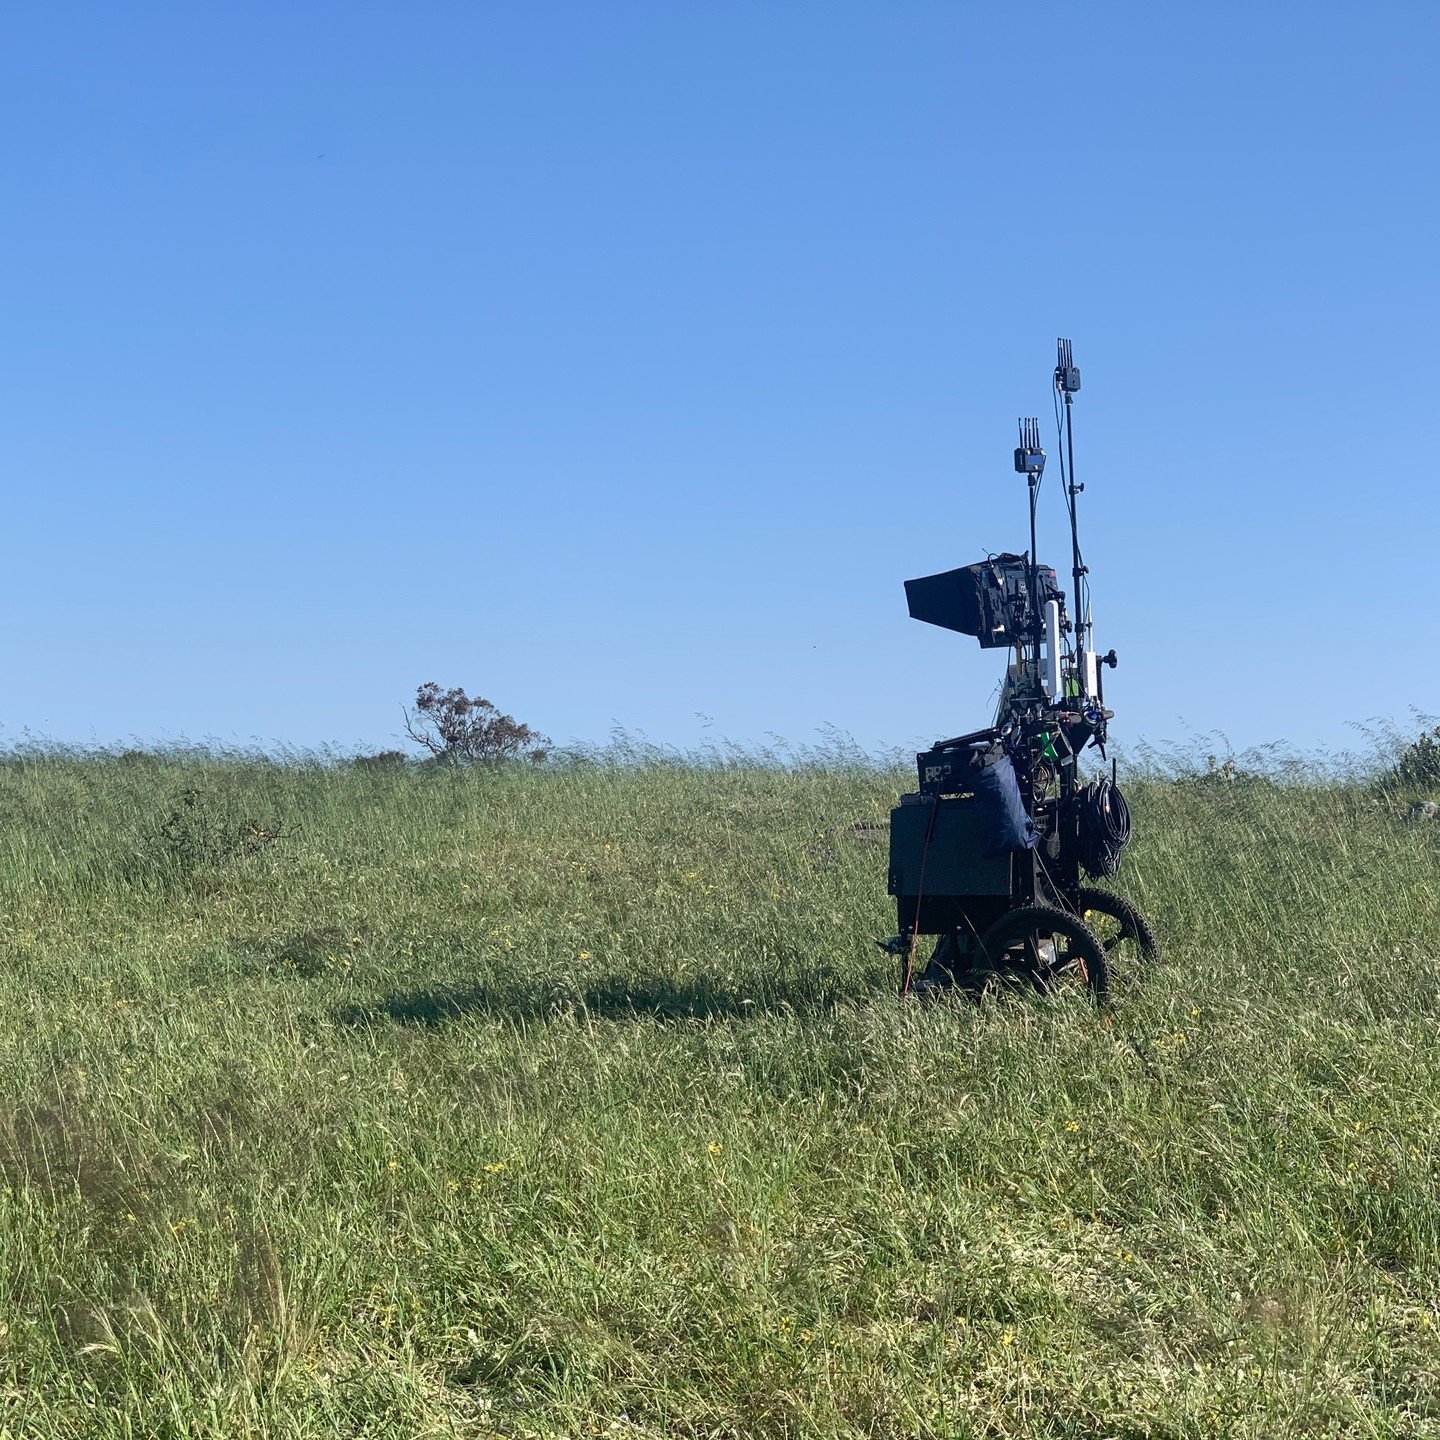 A Sunburnt Christmas, 2020, Every Cloud and Highview productions for @stanaustralia 

A lonely DIT trolley in a field, Shanks the Sheep in training as an assistant, and 1st AD @lancanyon in a chrismtas hat.

A team of three running @qtakehd onset, an